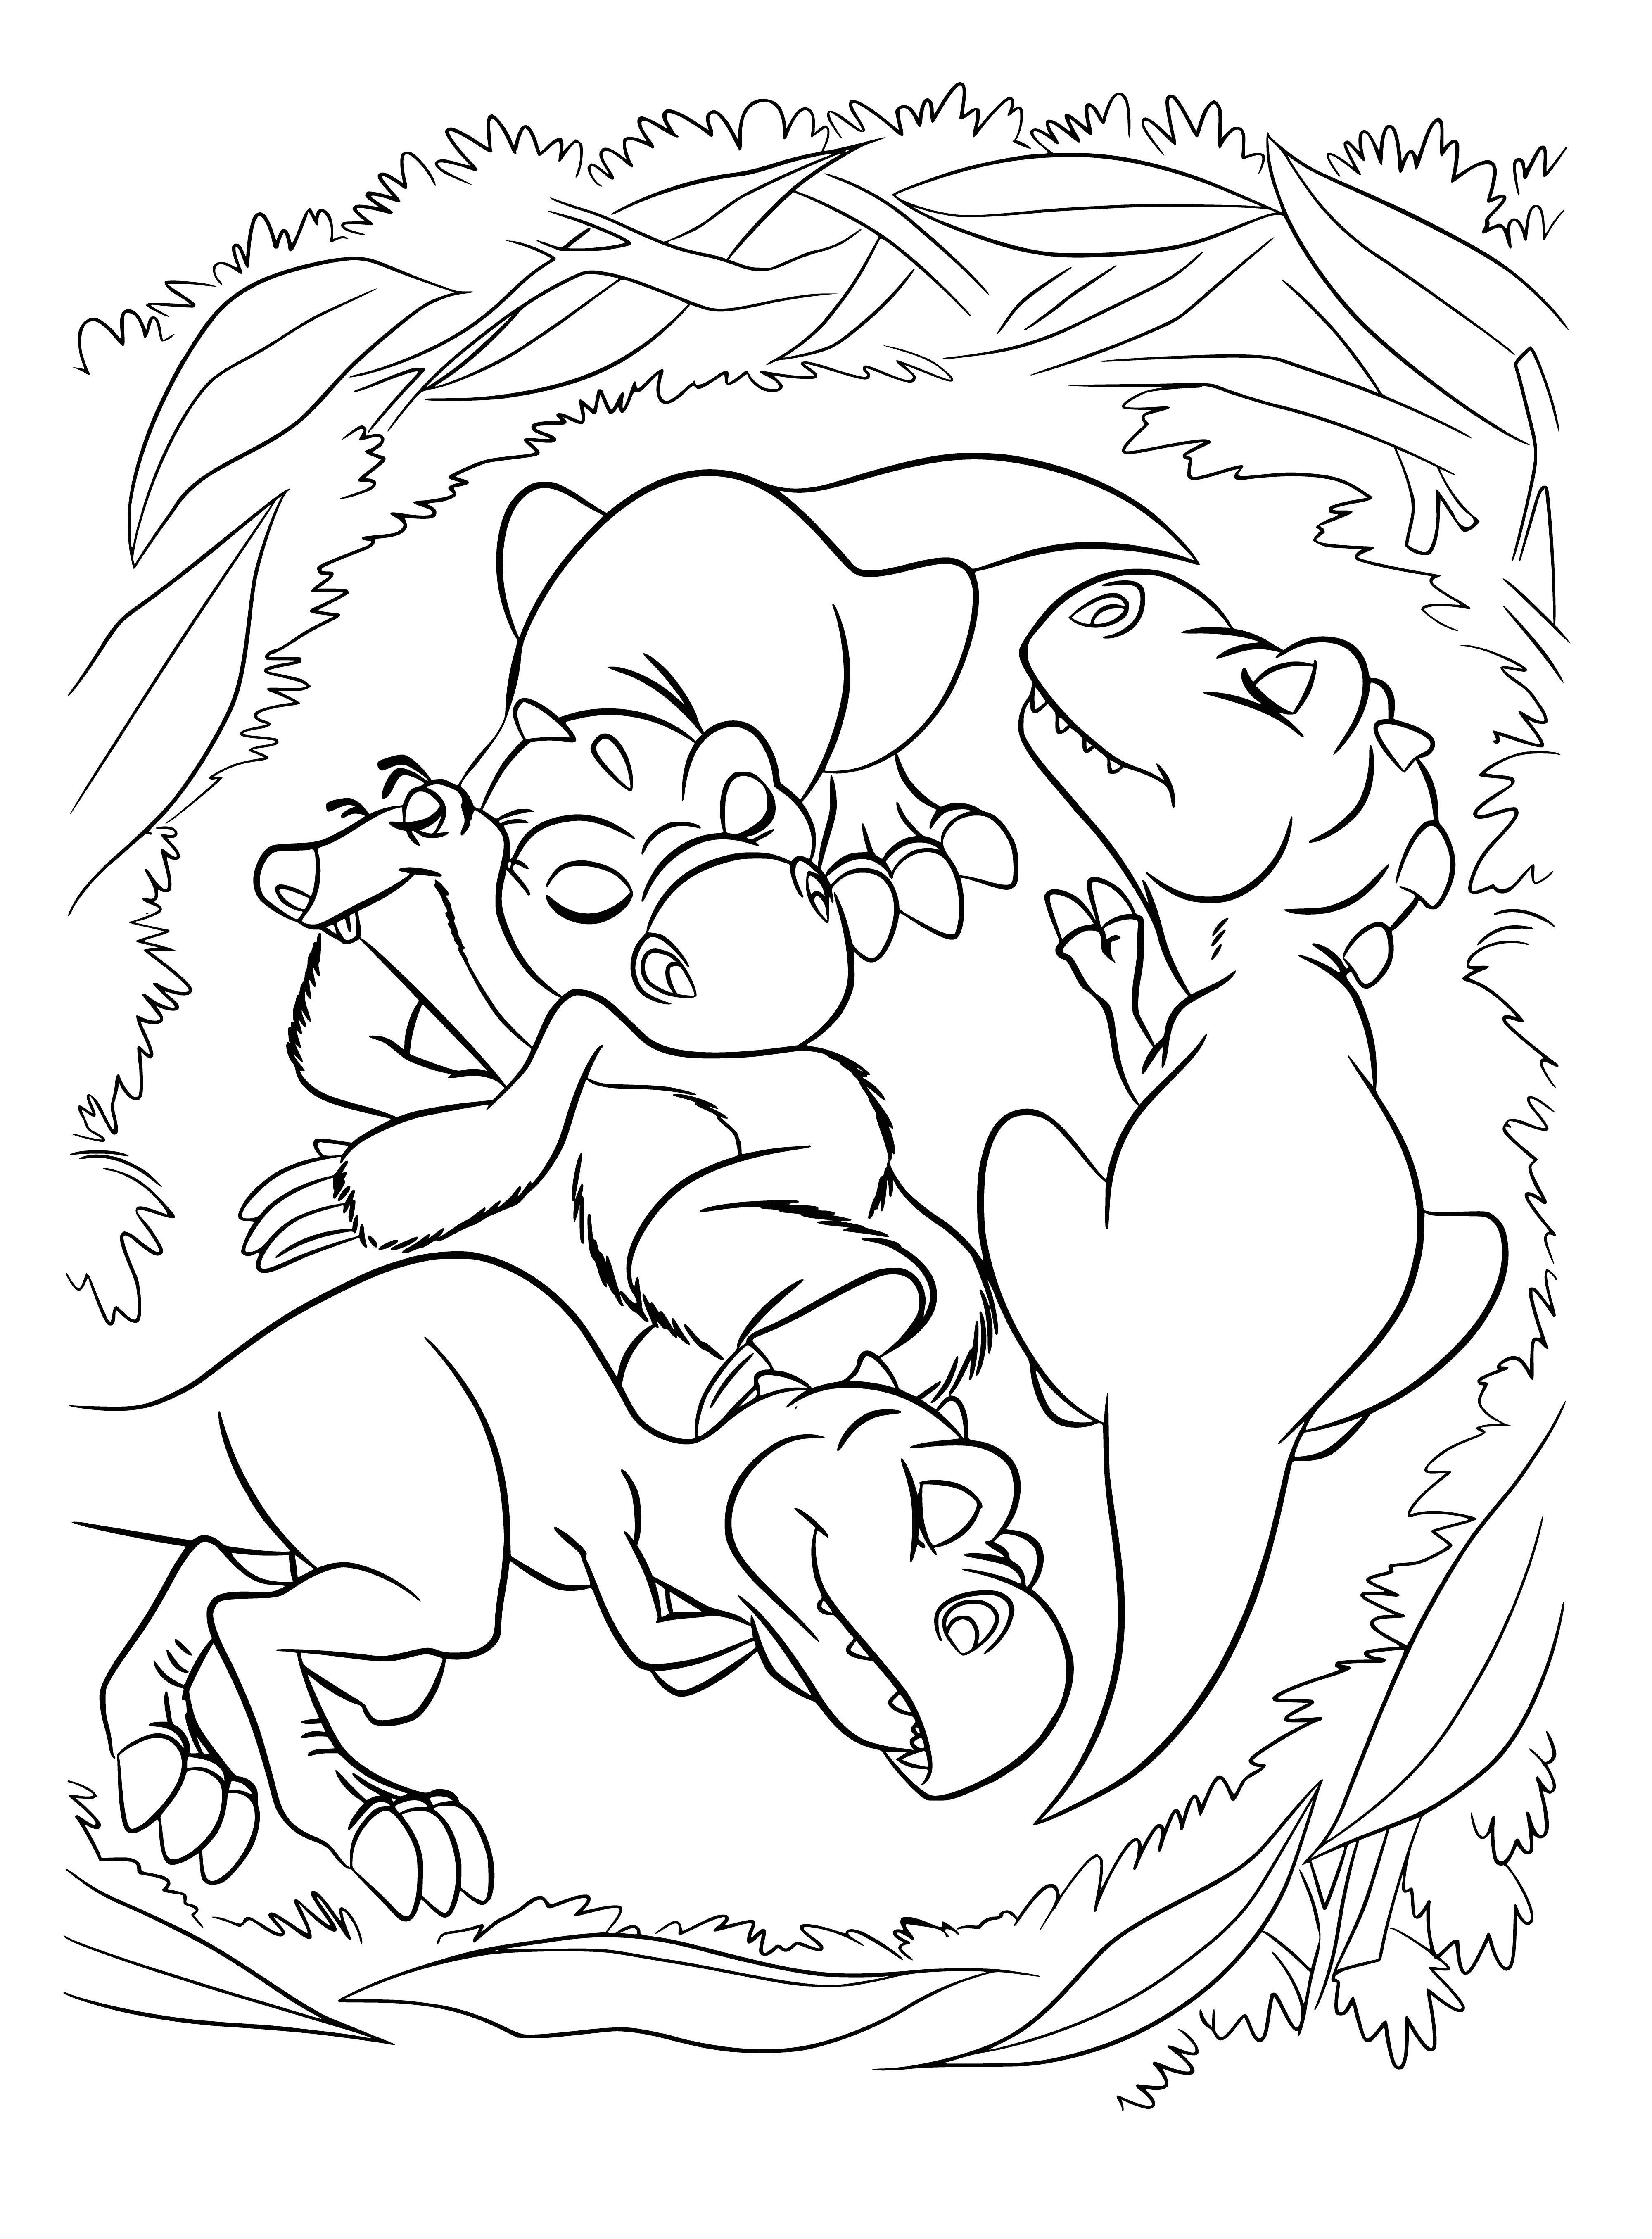 coloring page: Large blue & white dino playing in snow w/ small brown dinos surrounded by trees, mountains and snow.